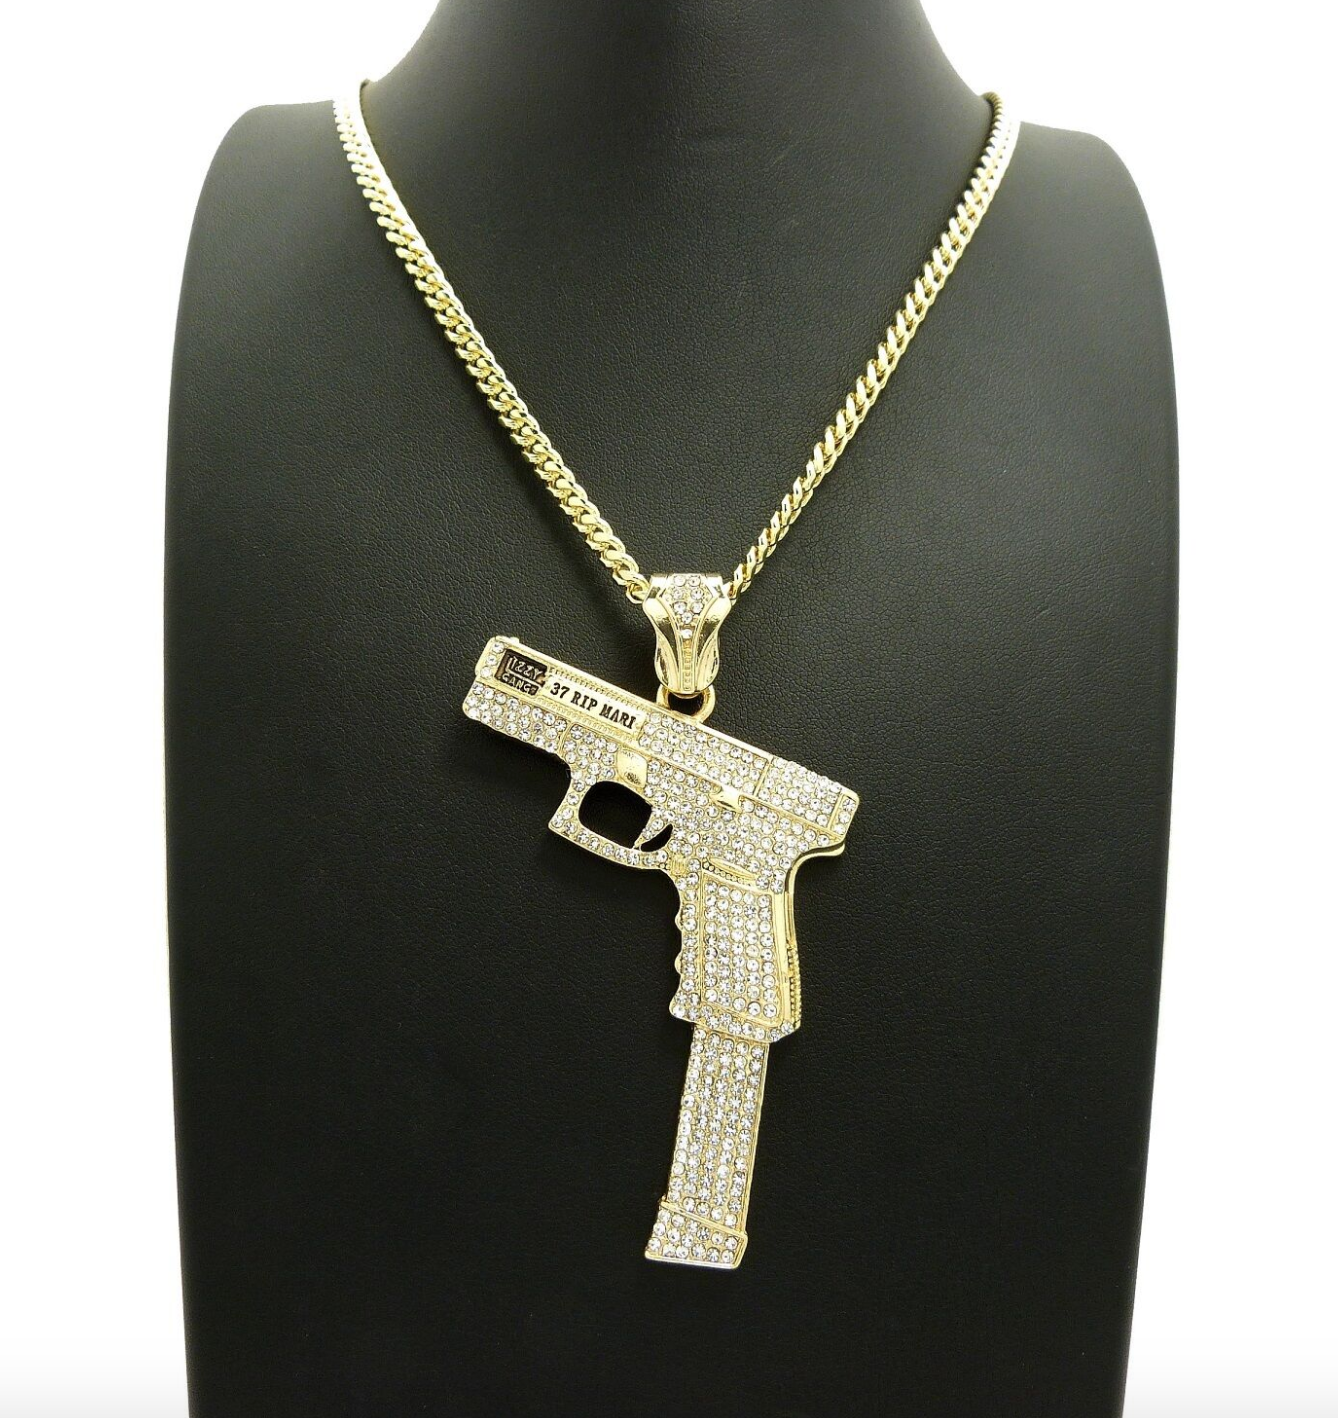 40 Pistol Necklace Extended Clip Pendant Gun Chain 9mm Simulated Diamond Hip Hop Iced Out Cuban Link 24in.